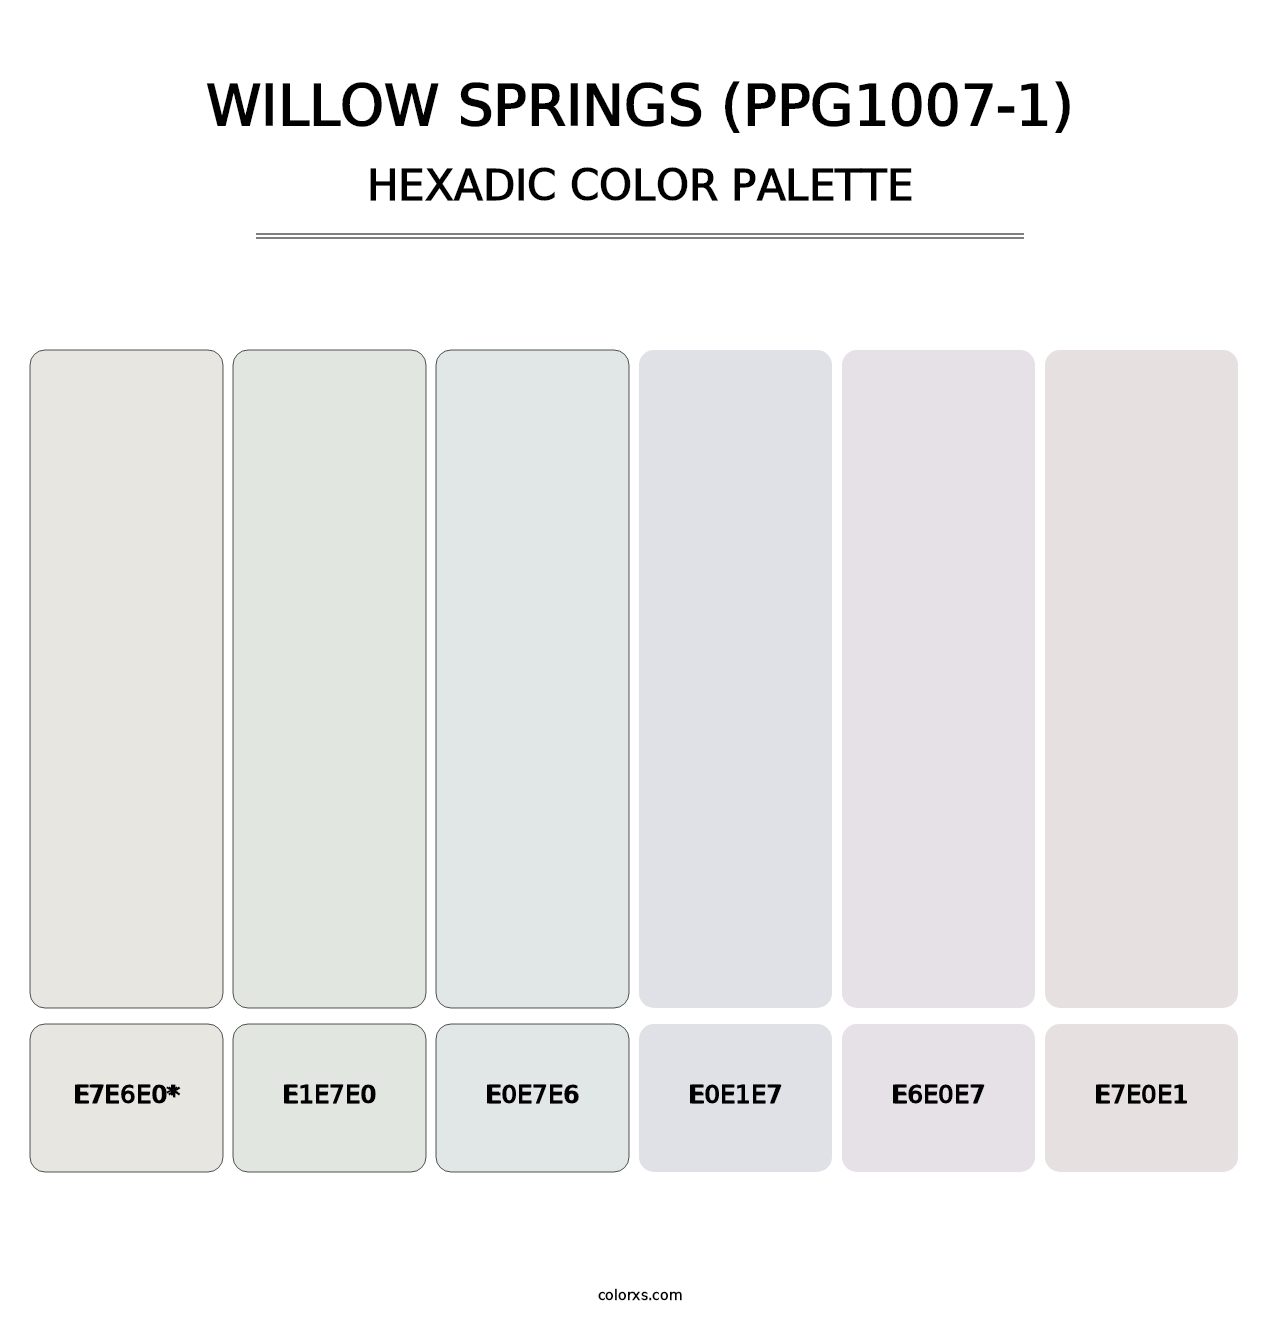 Willow Springs (PPG1007-1) - Hexadic Color Palette